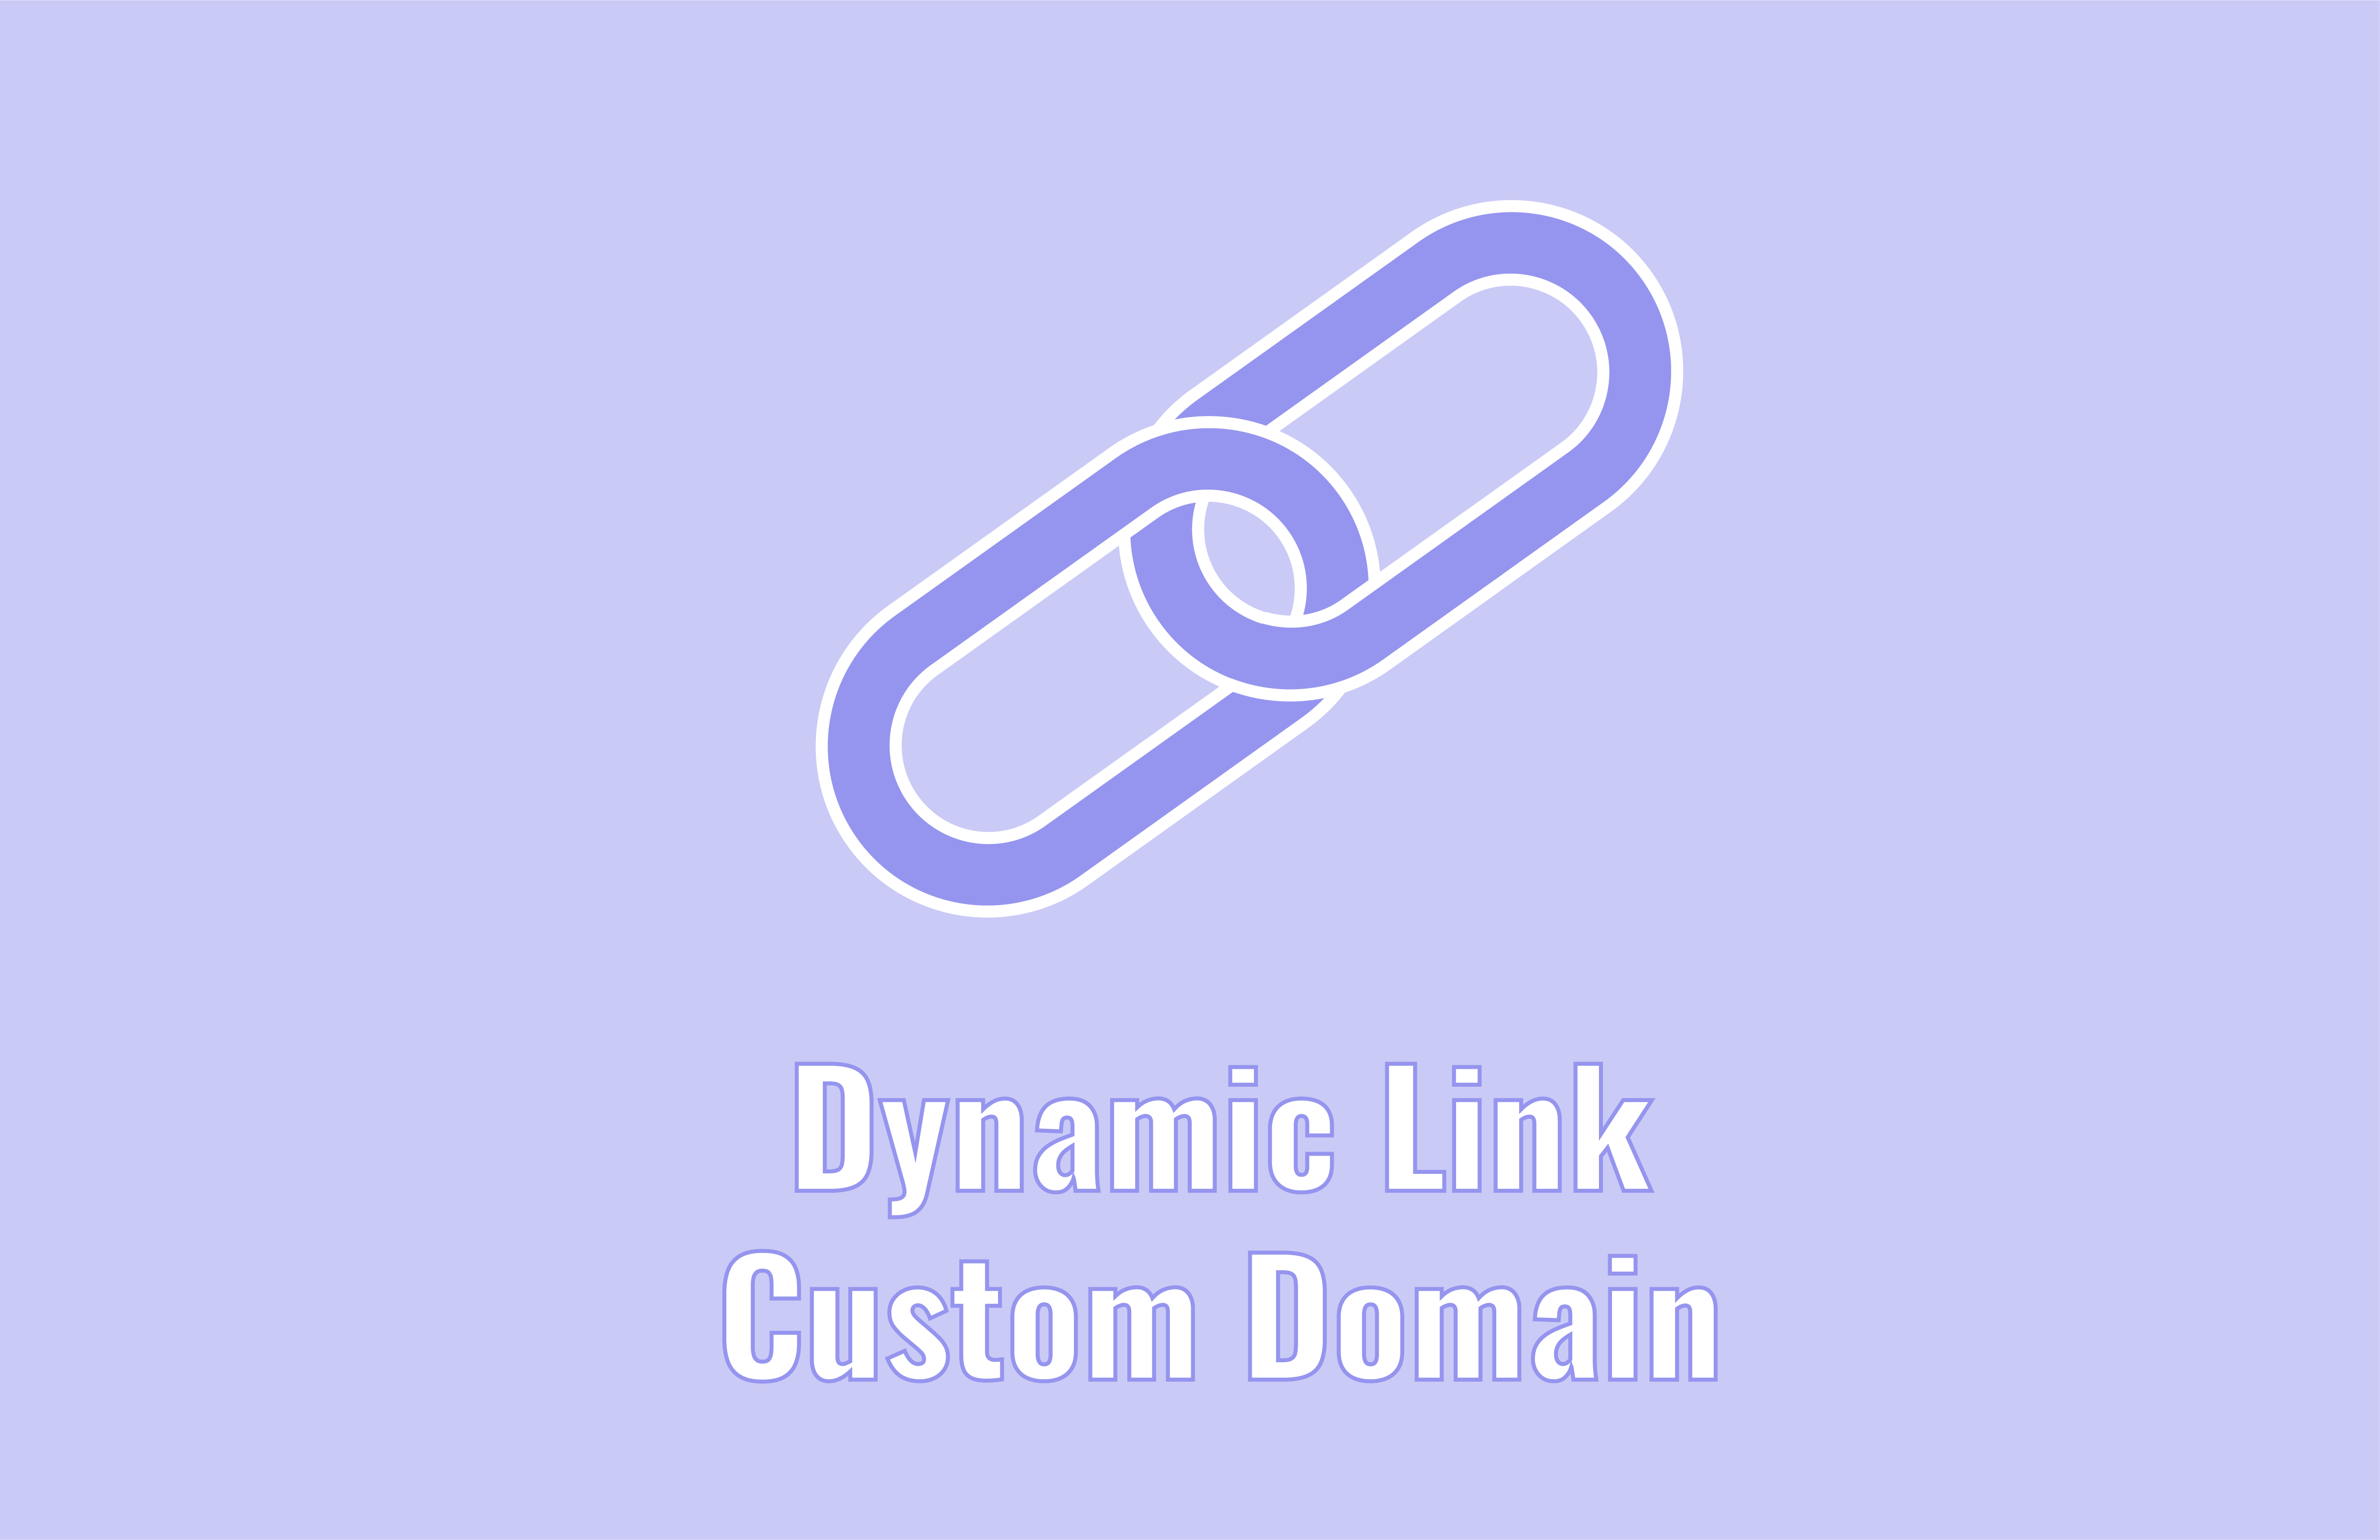 Connecting Domains for Dynamic Links